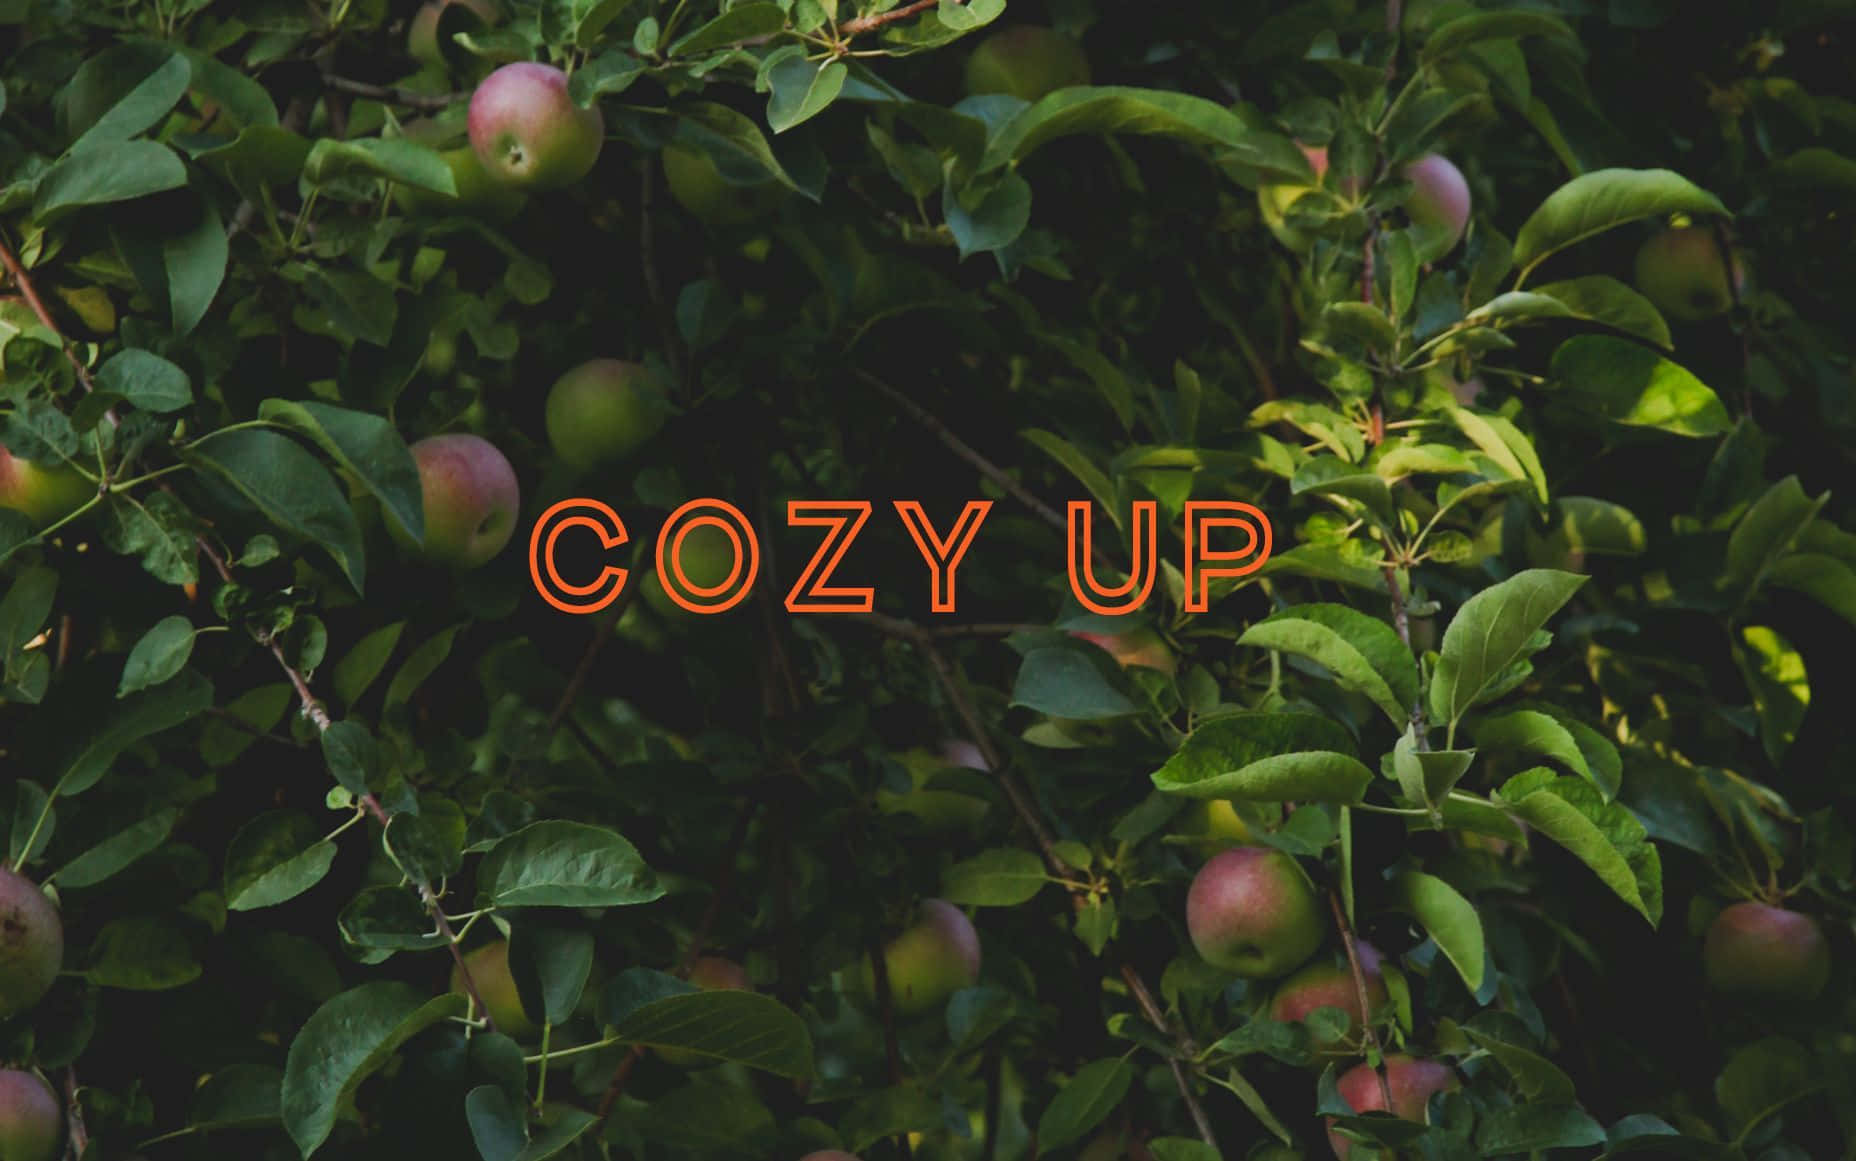 Cozy Up - A Tree With Apples Wallpaper